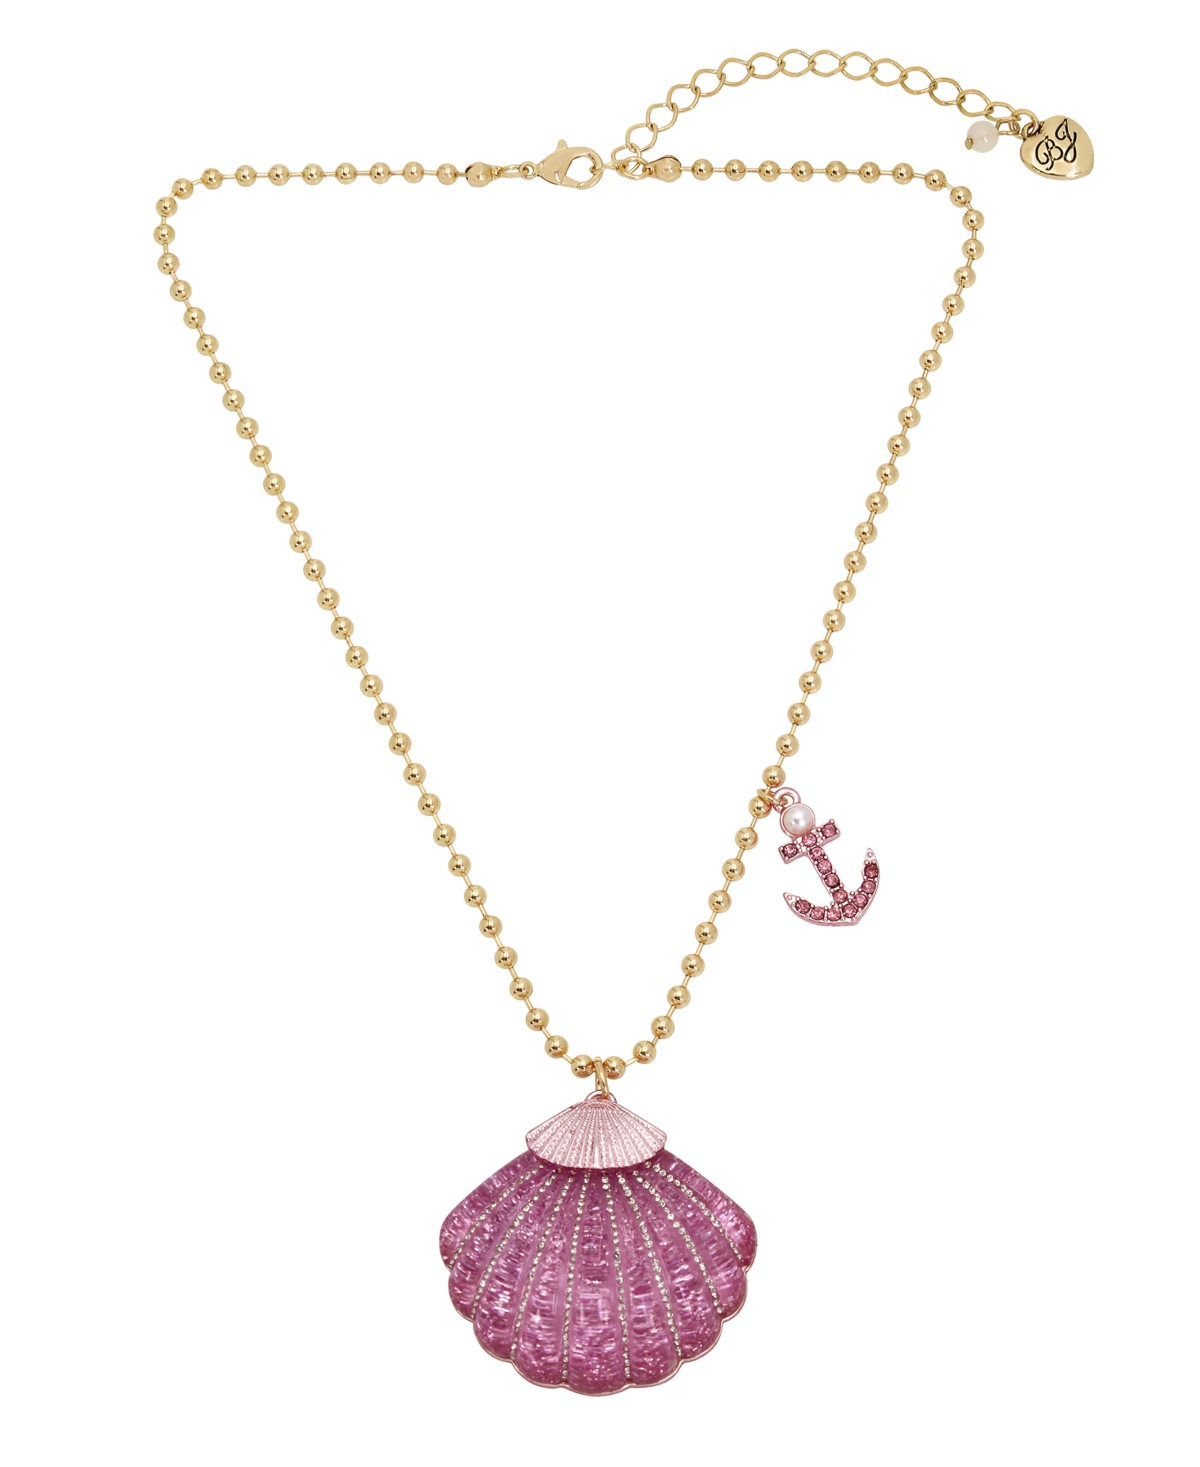 Betsey Johnson Faux Stone Seashell Pendant Necklace In Pink,gold